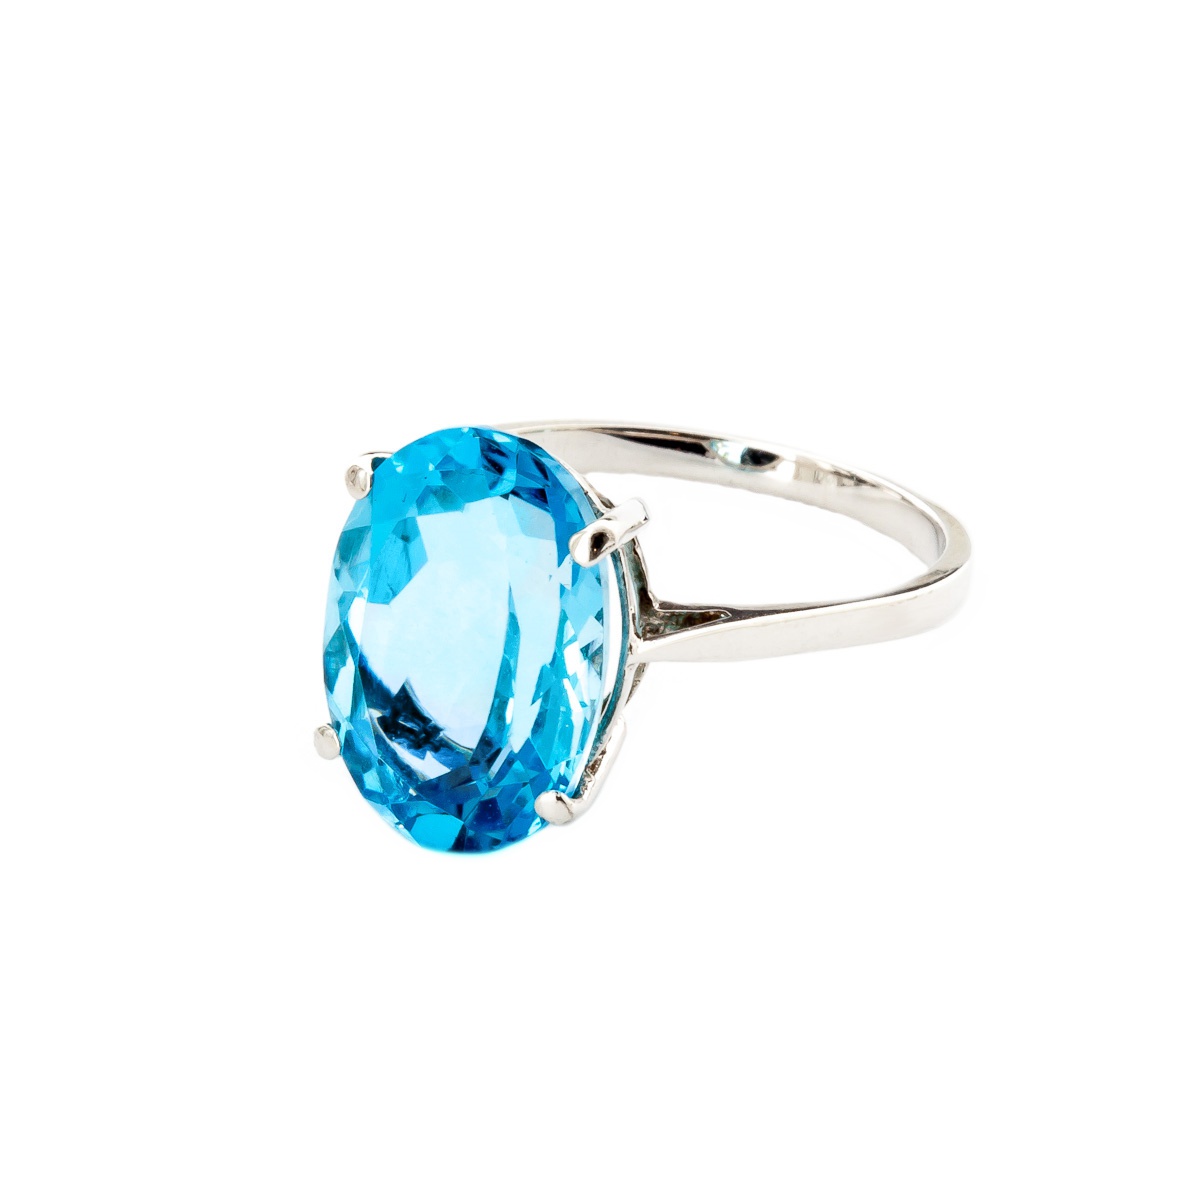 Galaxy Gold 8 Carat 14k Solid White Gold Ring Natural Oval Blue Topaz (10) - image 2 of 5